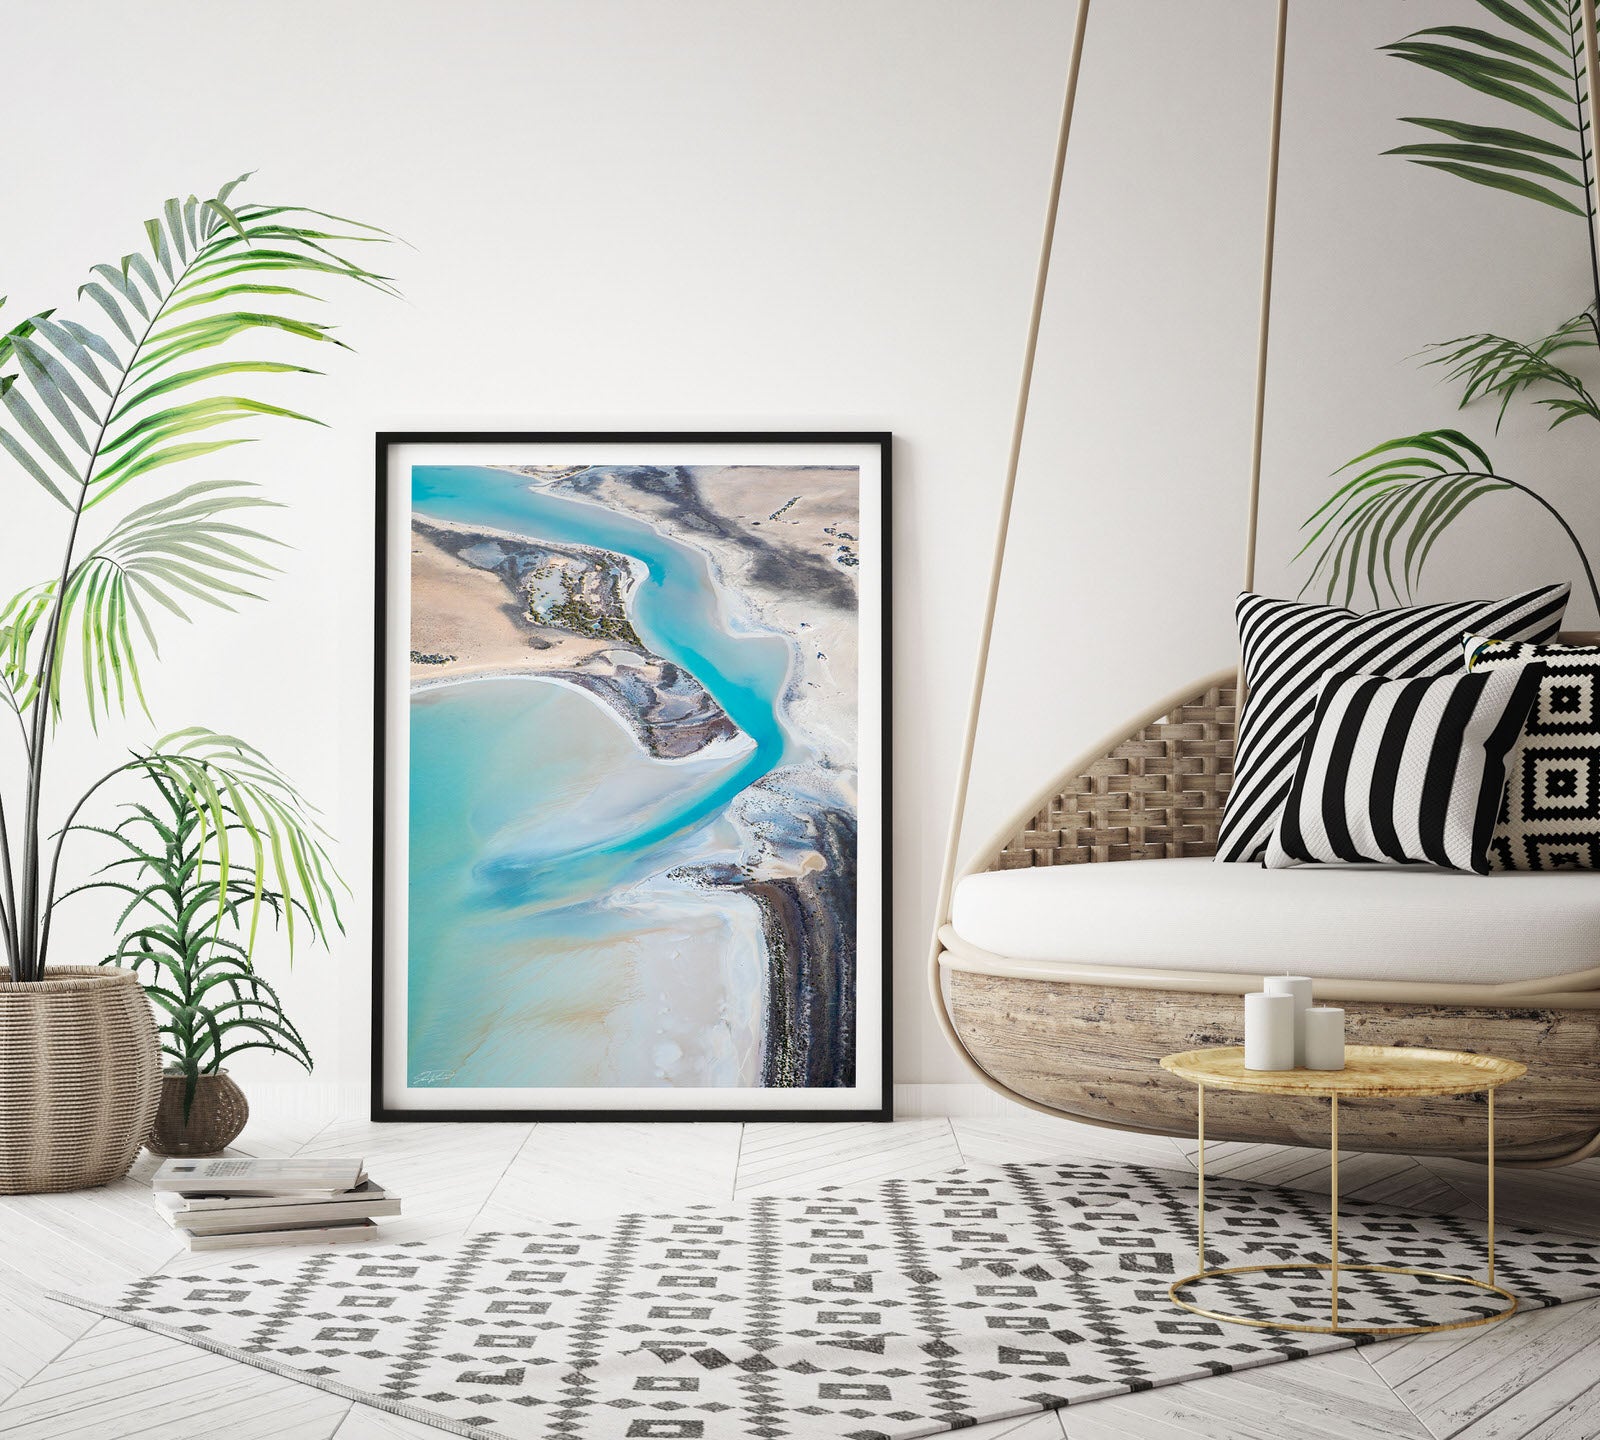 Pastel colour artwork in frame laying on wall with black frame and white matt board